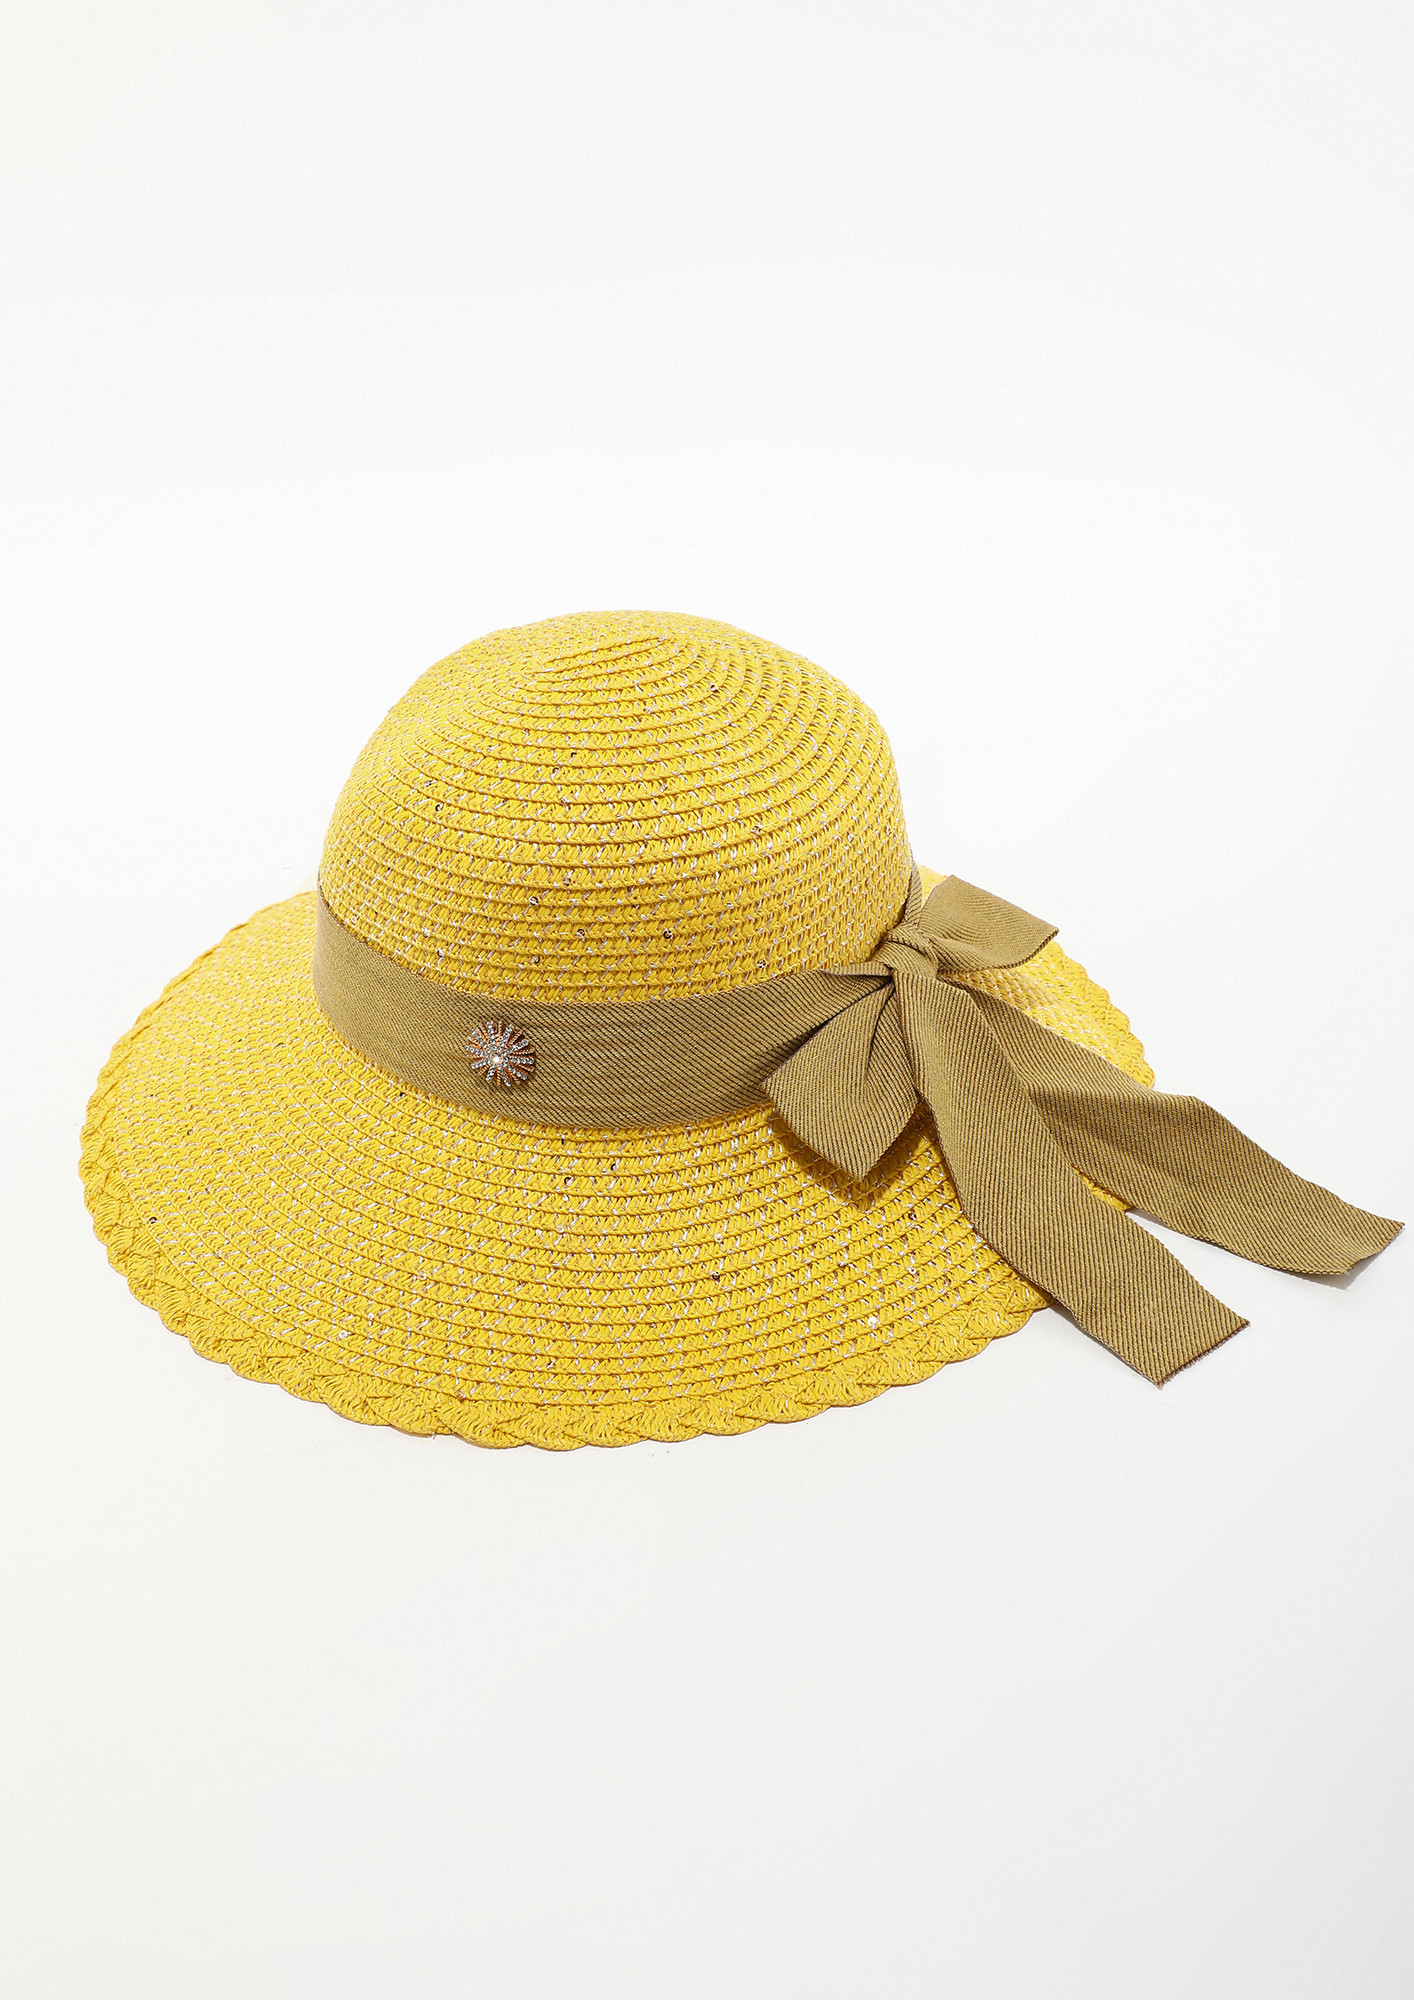 WRAPPED IN CUTENESS YELLOW HAT